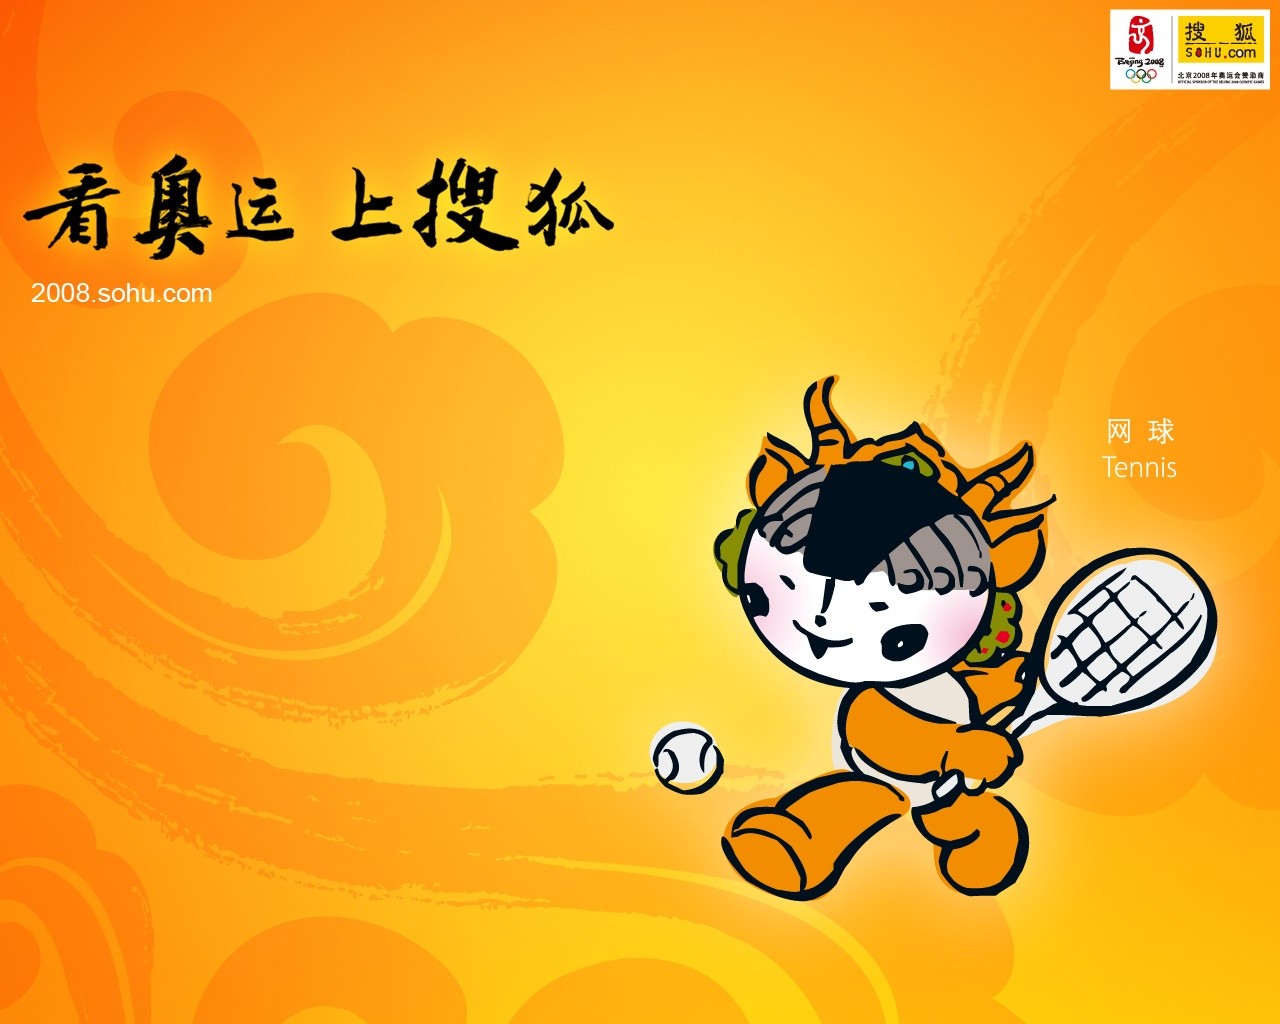 08 Olympic Games Fuwa Wallpapers #33 - 1280x1024